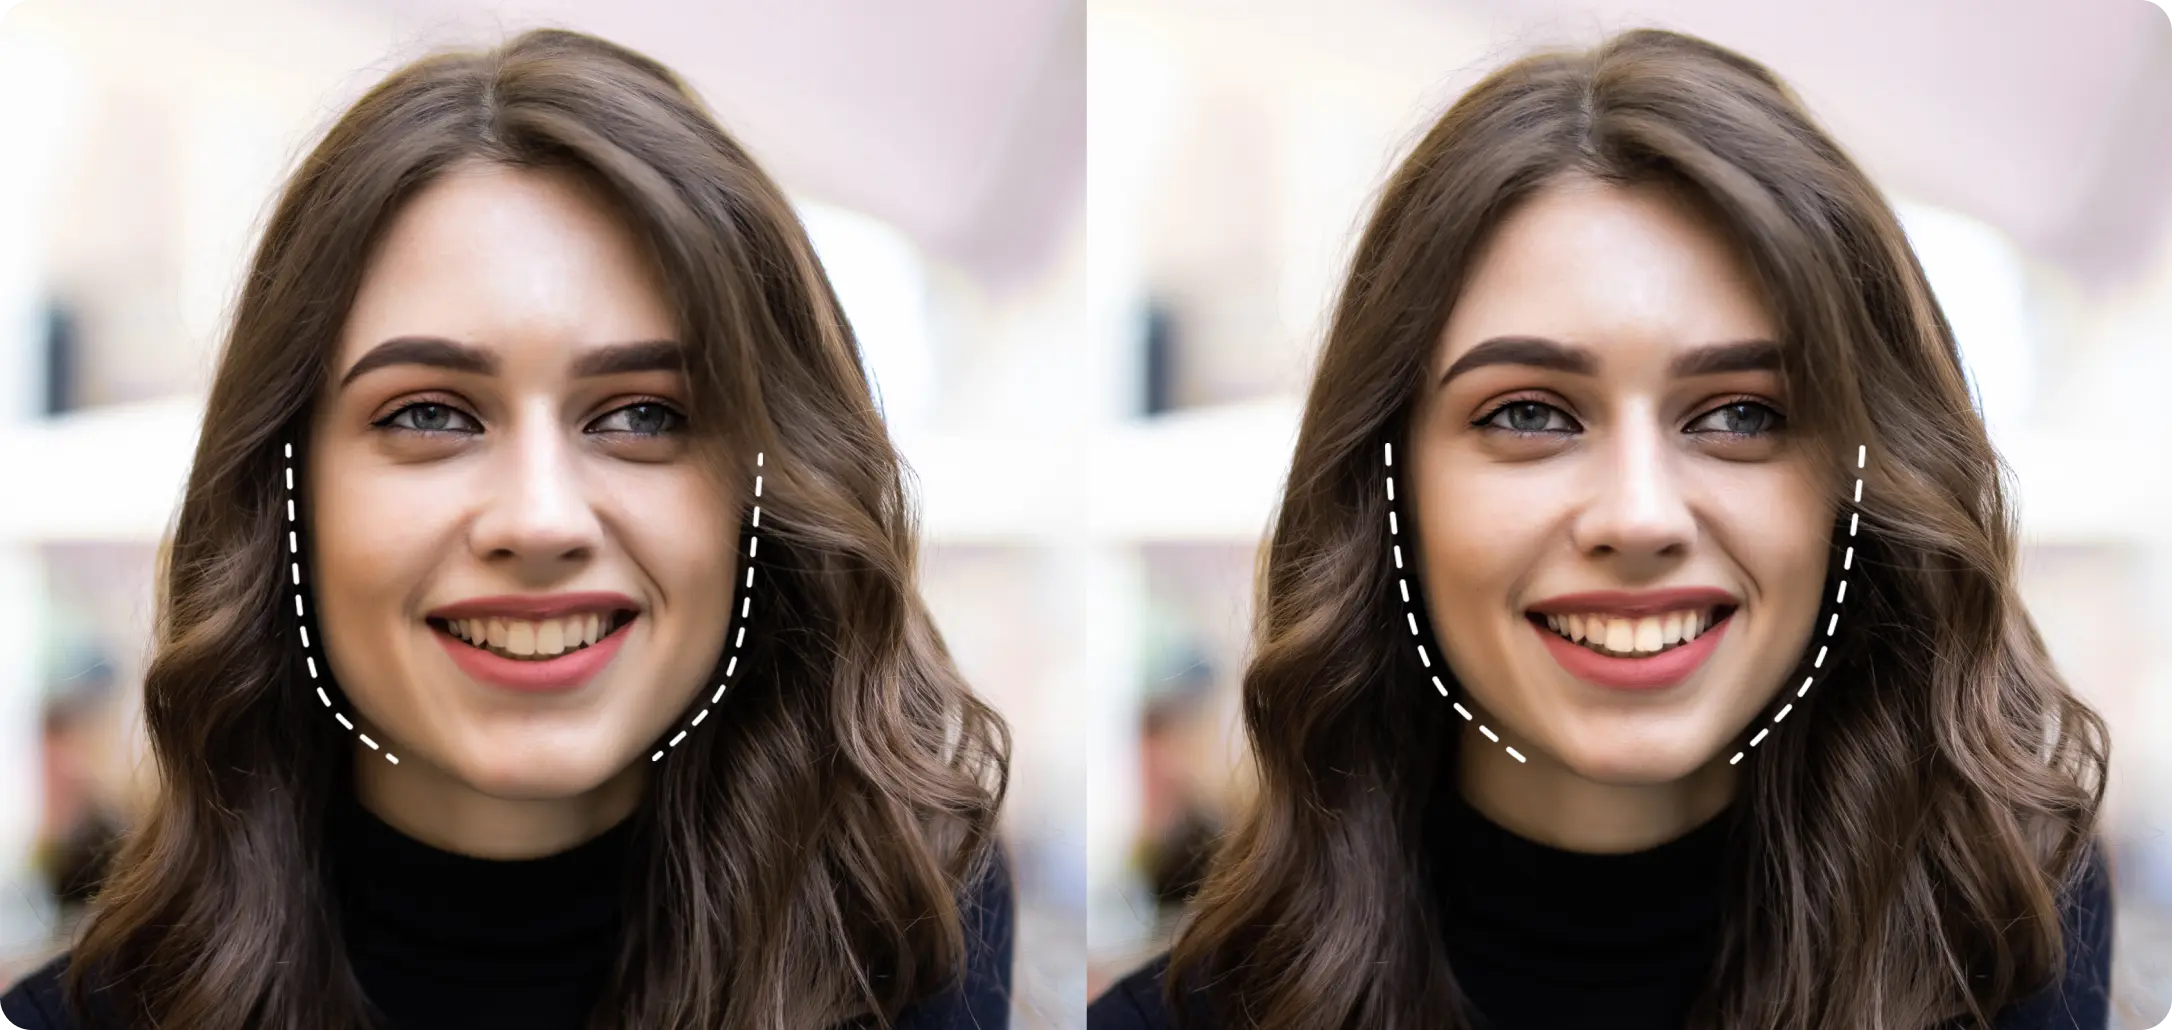 Using AI, the jawline of a girl is reshaped